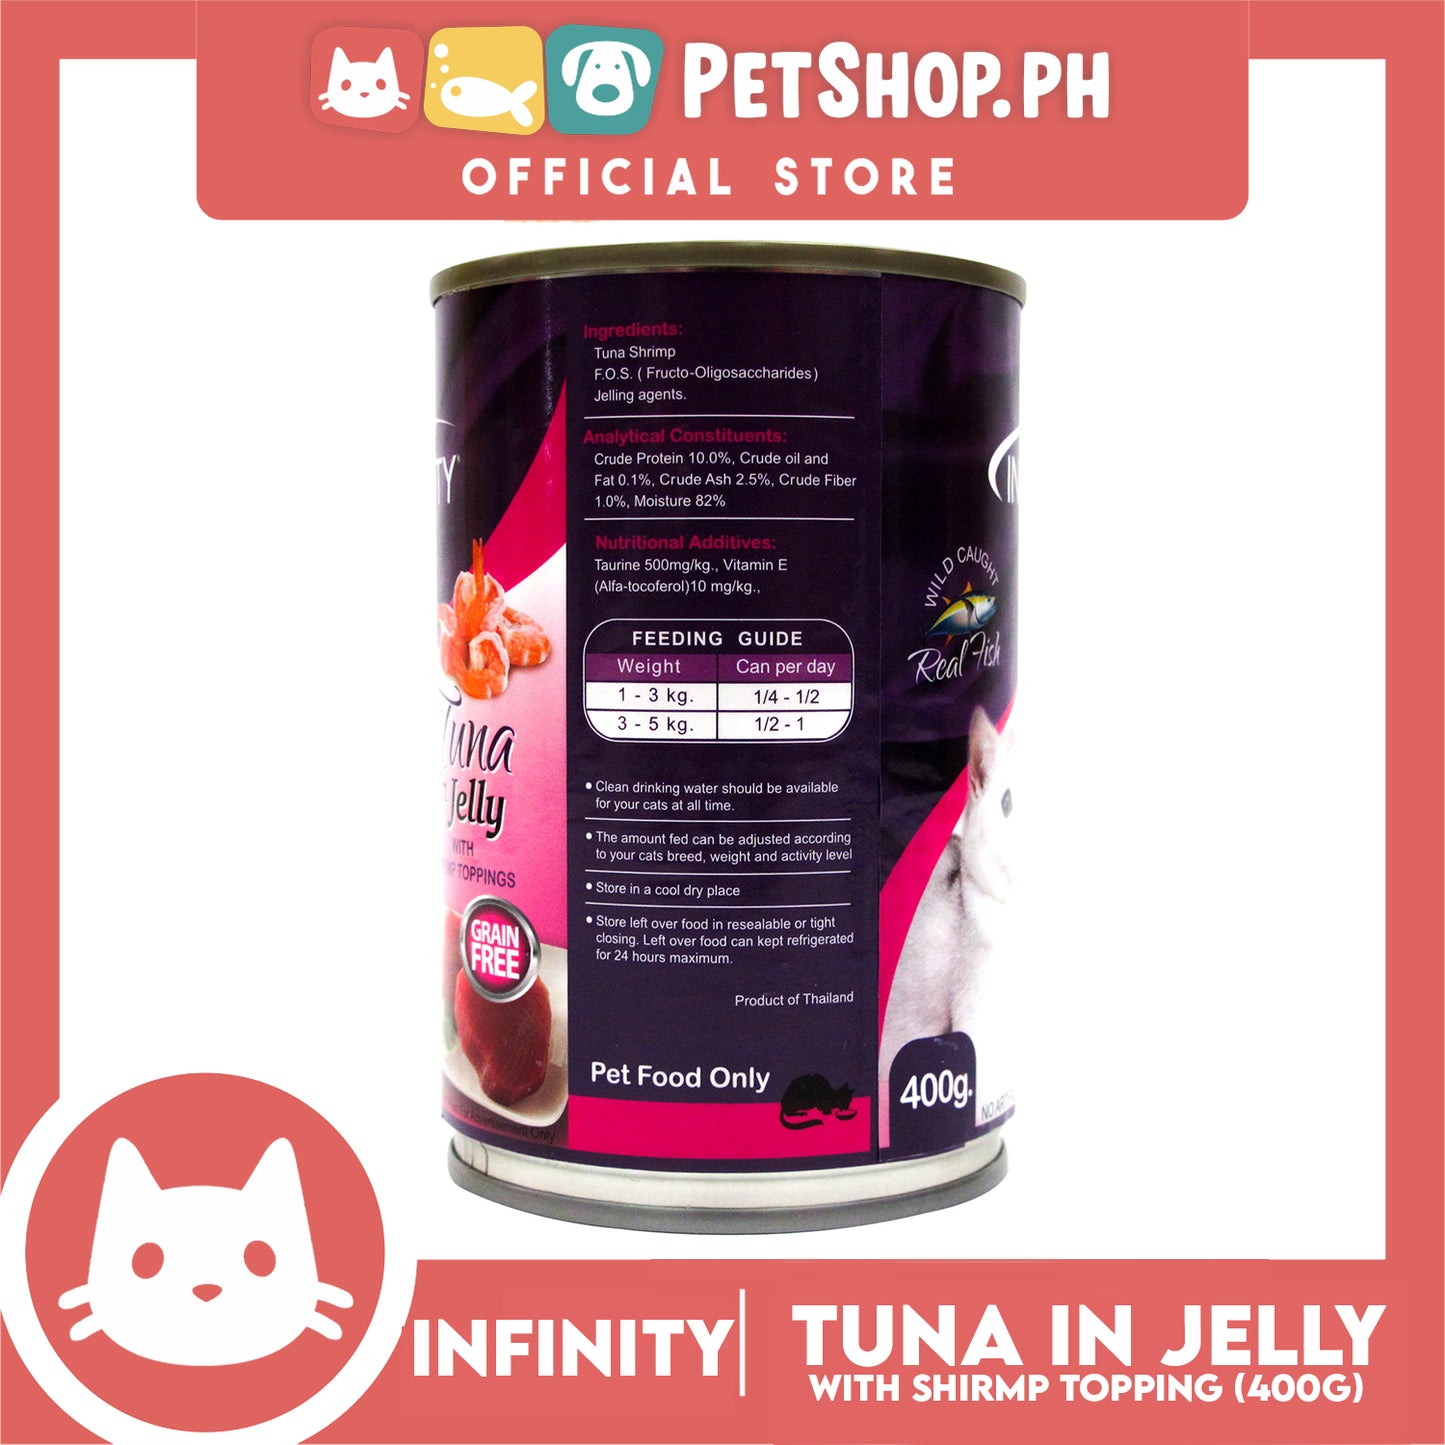 Infinity Tuna In Jelly Canned, Grain Free 400g Canned Wet Food (Shrimp Toppings) Cat Food